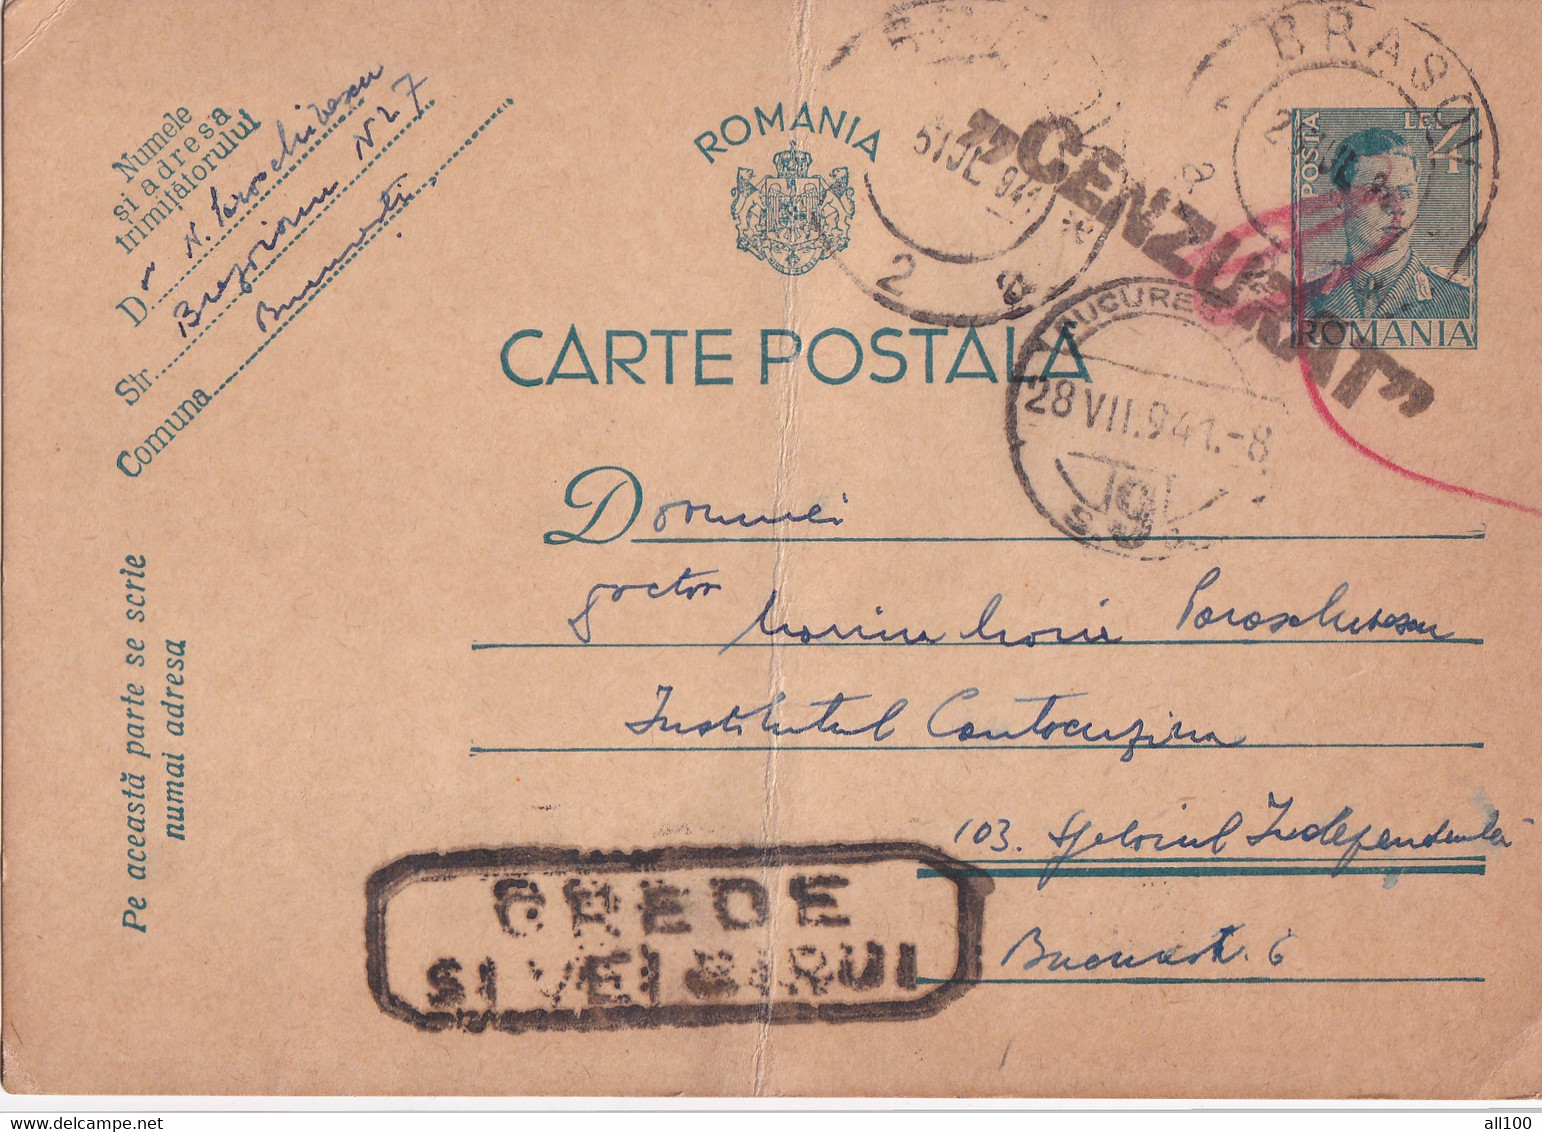 A16458 - MILITARY LETTER ROMANIA POSTAL STATIONERY CENZORED BRASOV  CREDE SI VEI BIRUI STAMPEL  KING MICHAEL 4 LEI 1941 - Lettres 2ème Guerre Mondiale